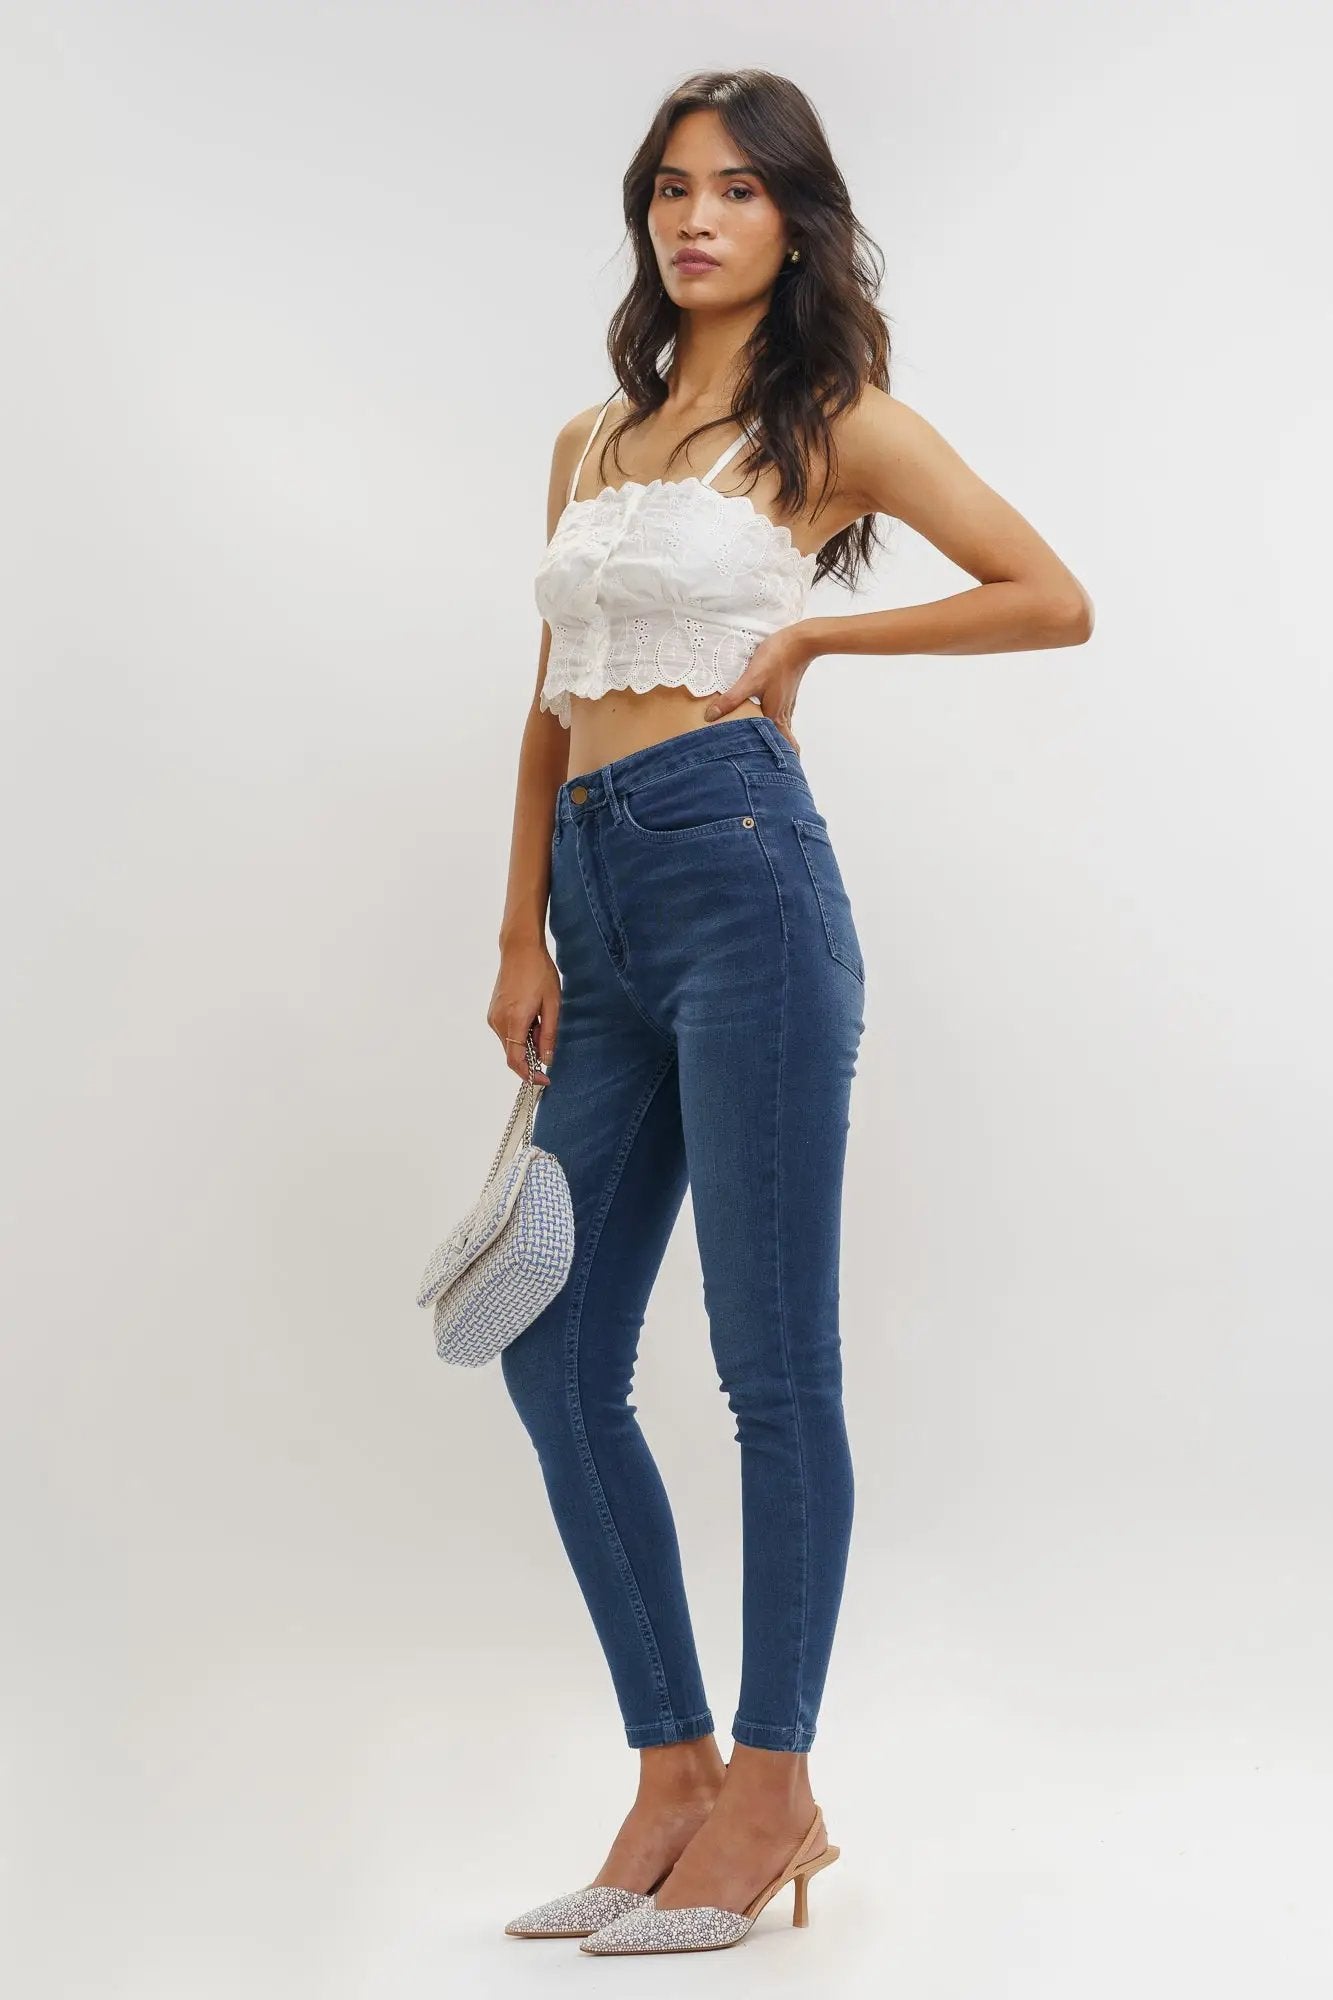 Women's White Cropped Top, Light Blue Skinny Pants, White Leather